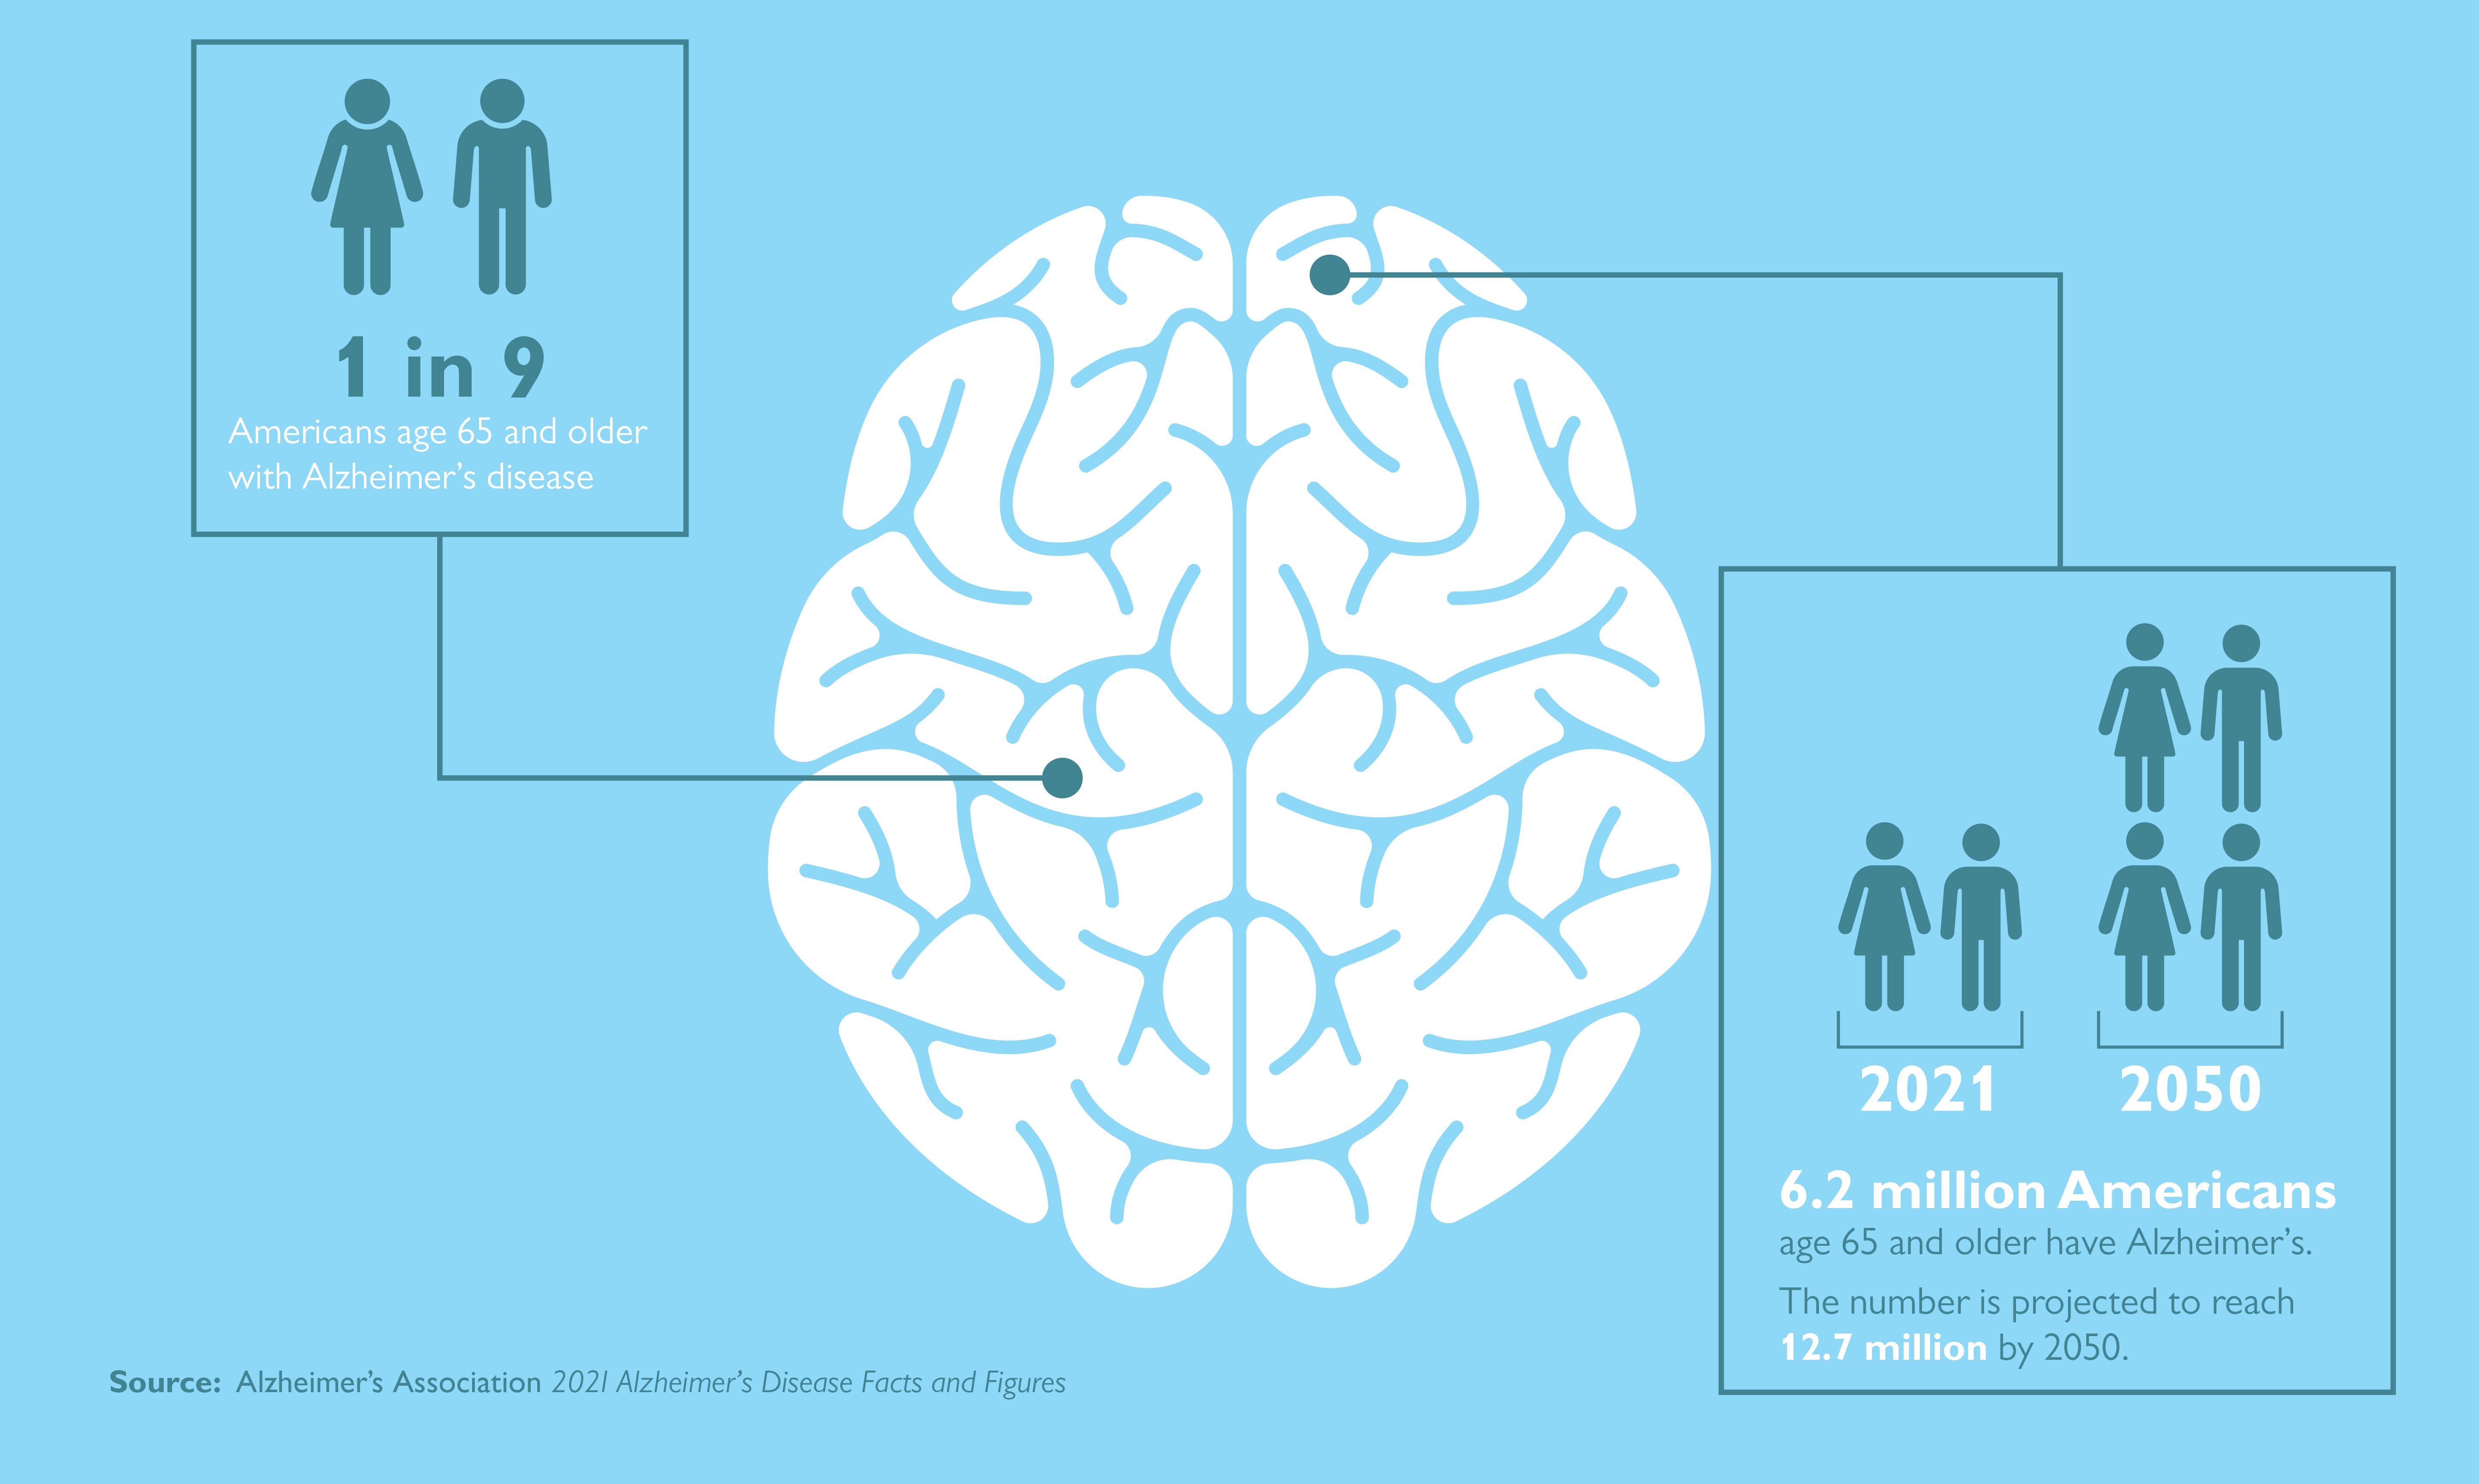 Infographic of a brain and alzheimers facts. Left side: 1 in 9 Americans age 65 and older has Alzheimer’s disease.Right side: 6.2 million Americans age 65 and older have Alzheimer’s. The number is projected to reach 12.7 million by 2050.